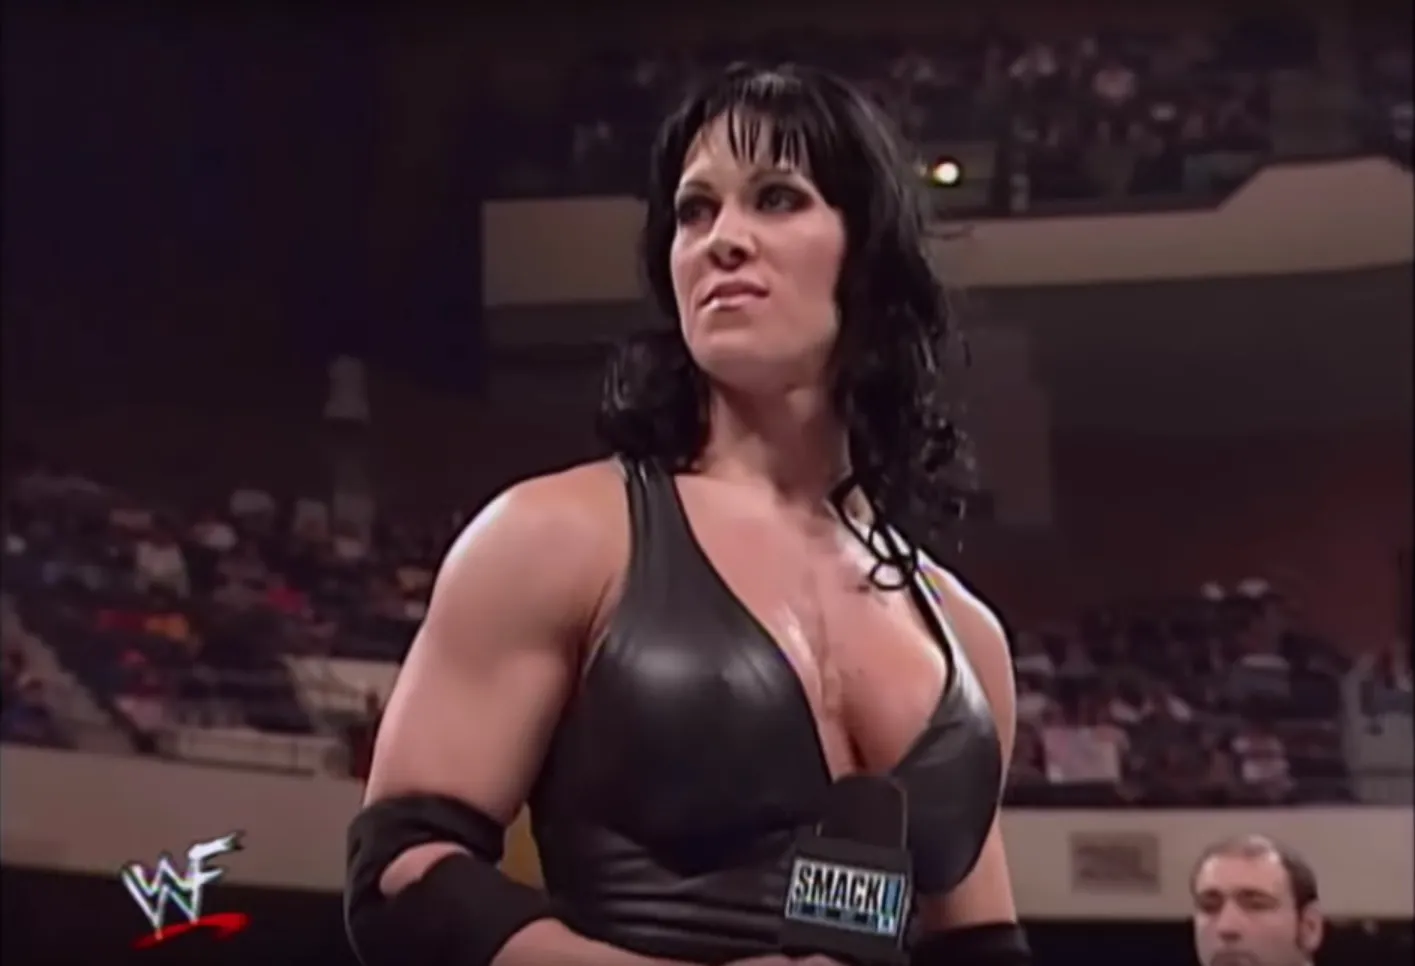 WWE Pioneer Chyna Dies at Age 45 | The Mary Sue